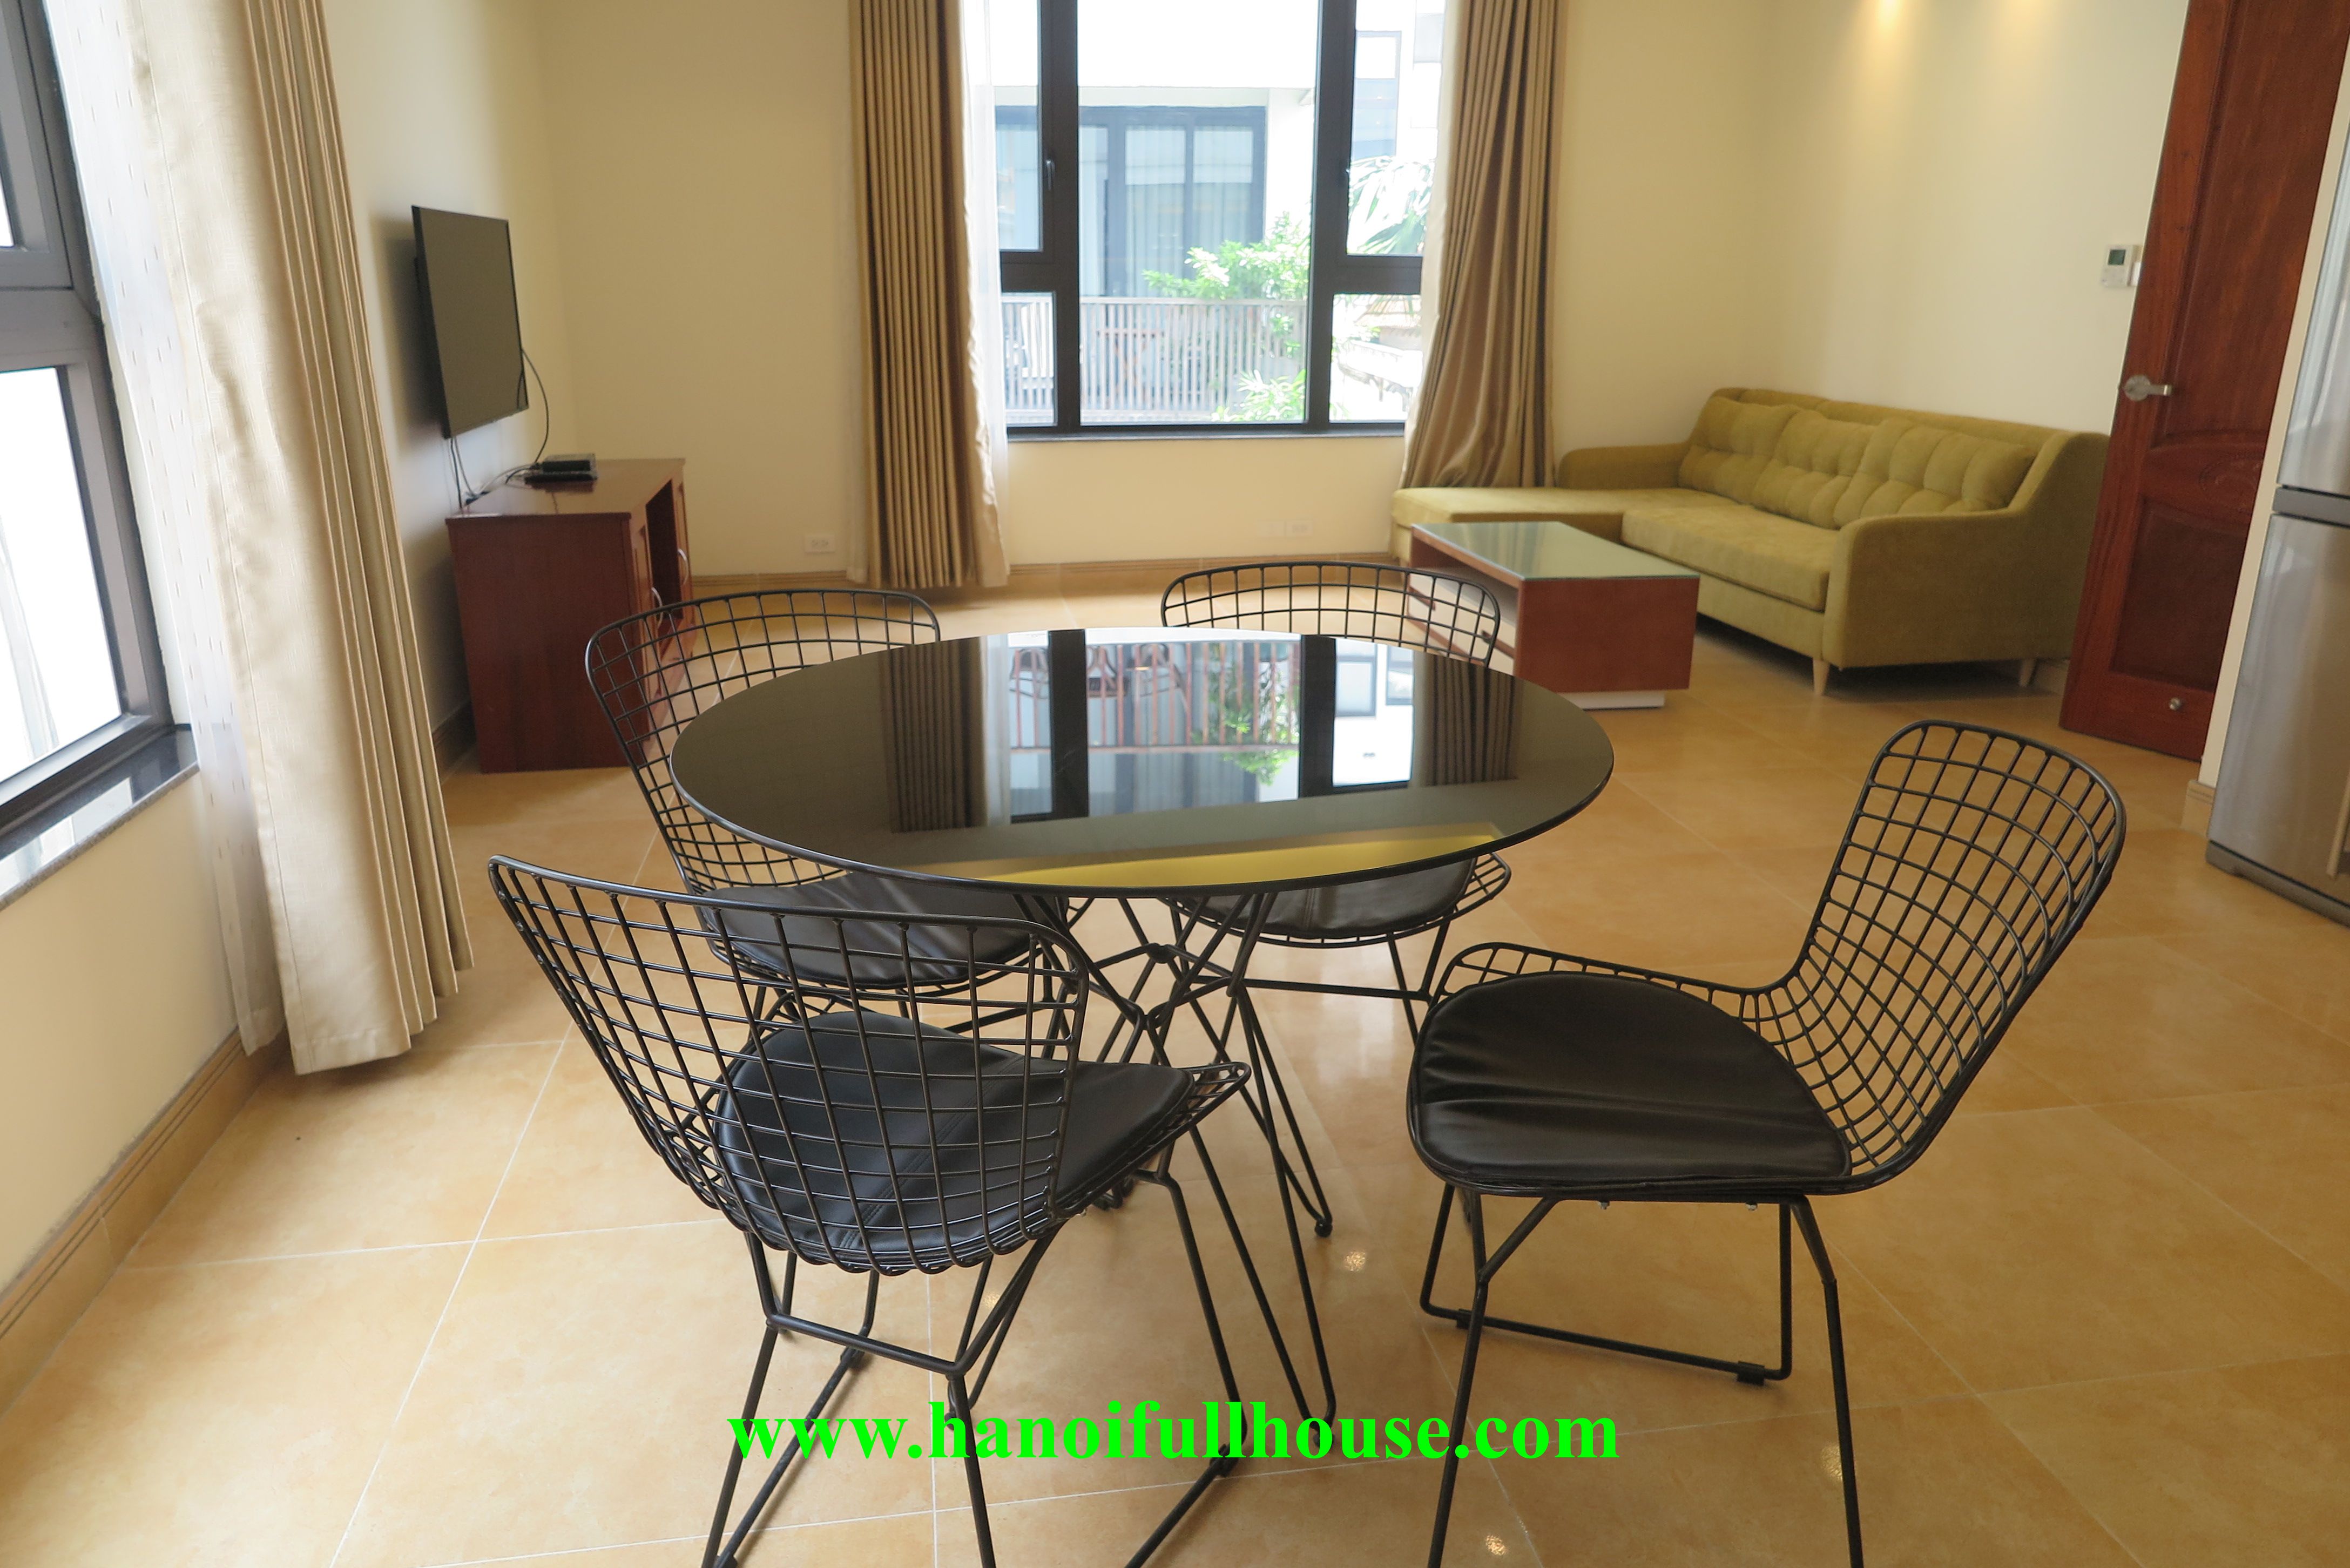 3 bedrooms apartment in Xom Chua street, plenty of light, quiet and lovely. 